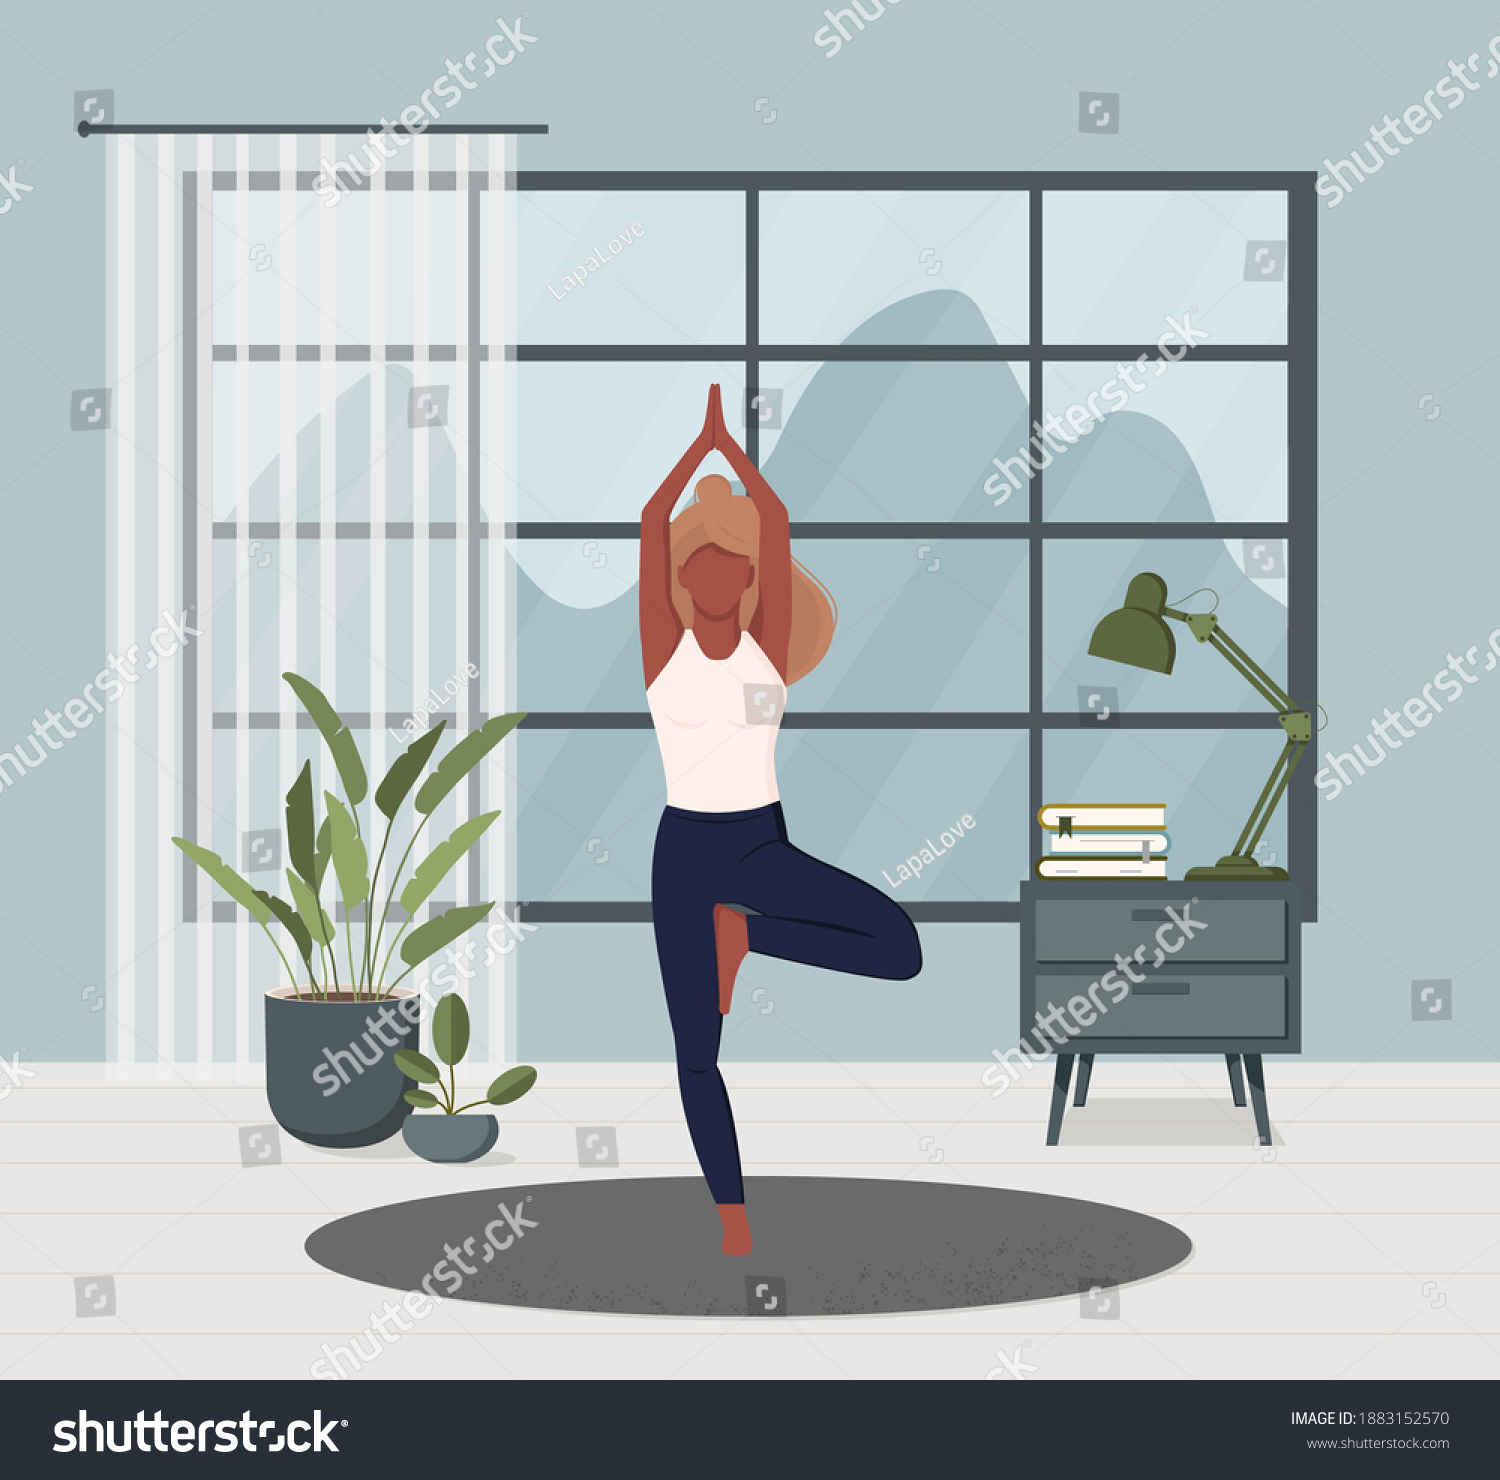 SVG of Home yoga. Meditation. Sports. Girl performs aerobics exercises and morning meditation at home. Mental health and relaxation. Stock illustration. Physical and spiritual practice. Vector graphics. svg